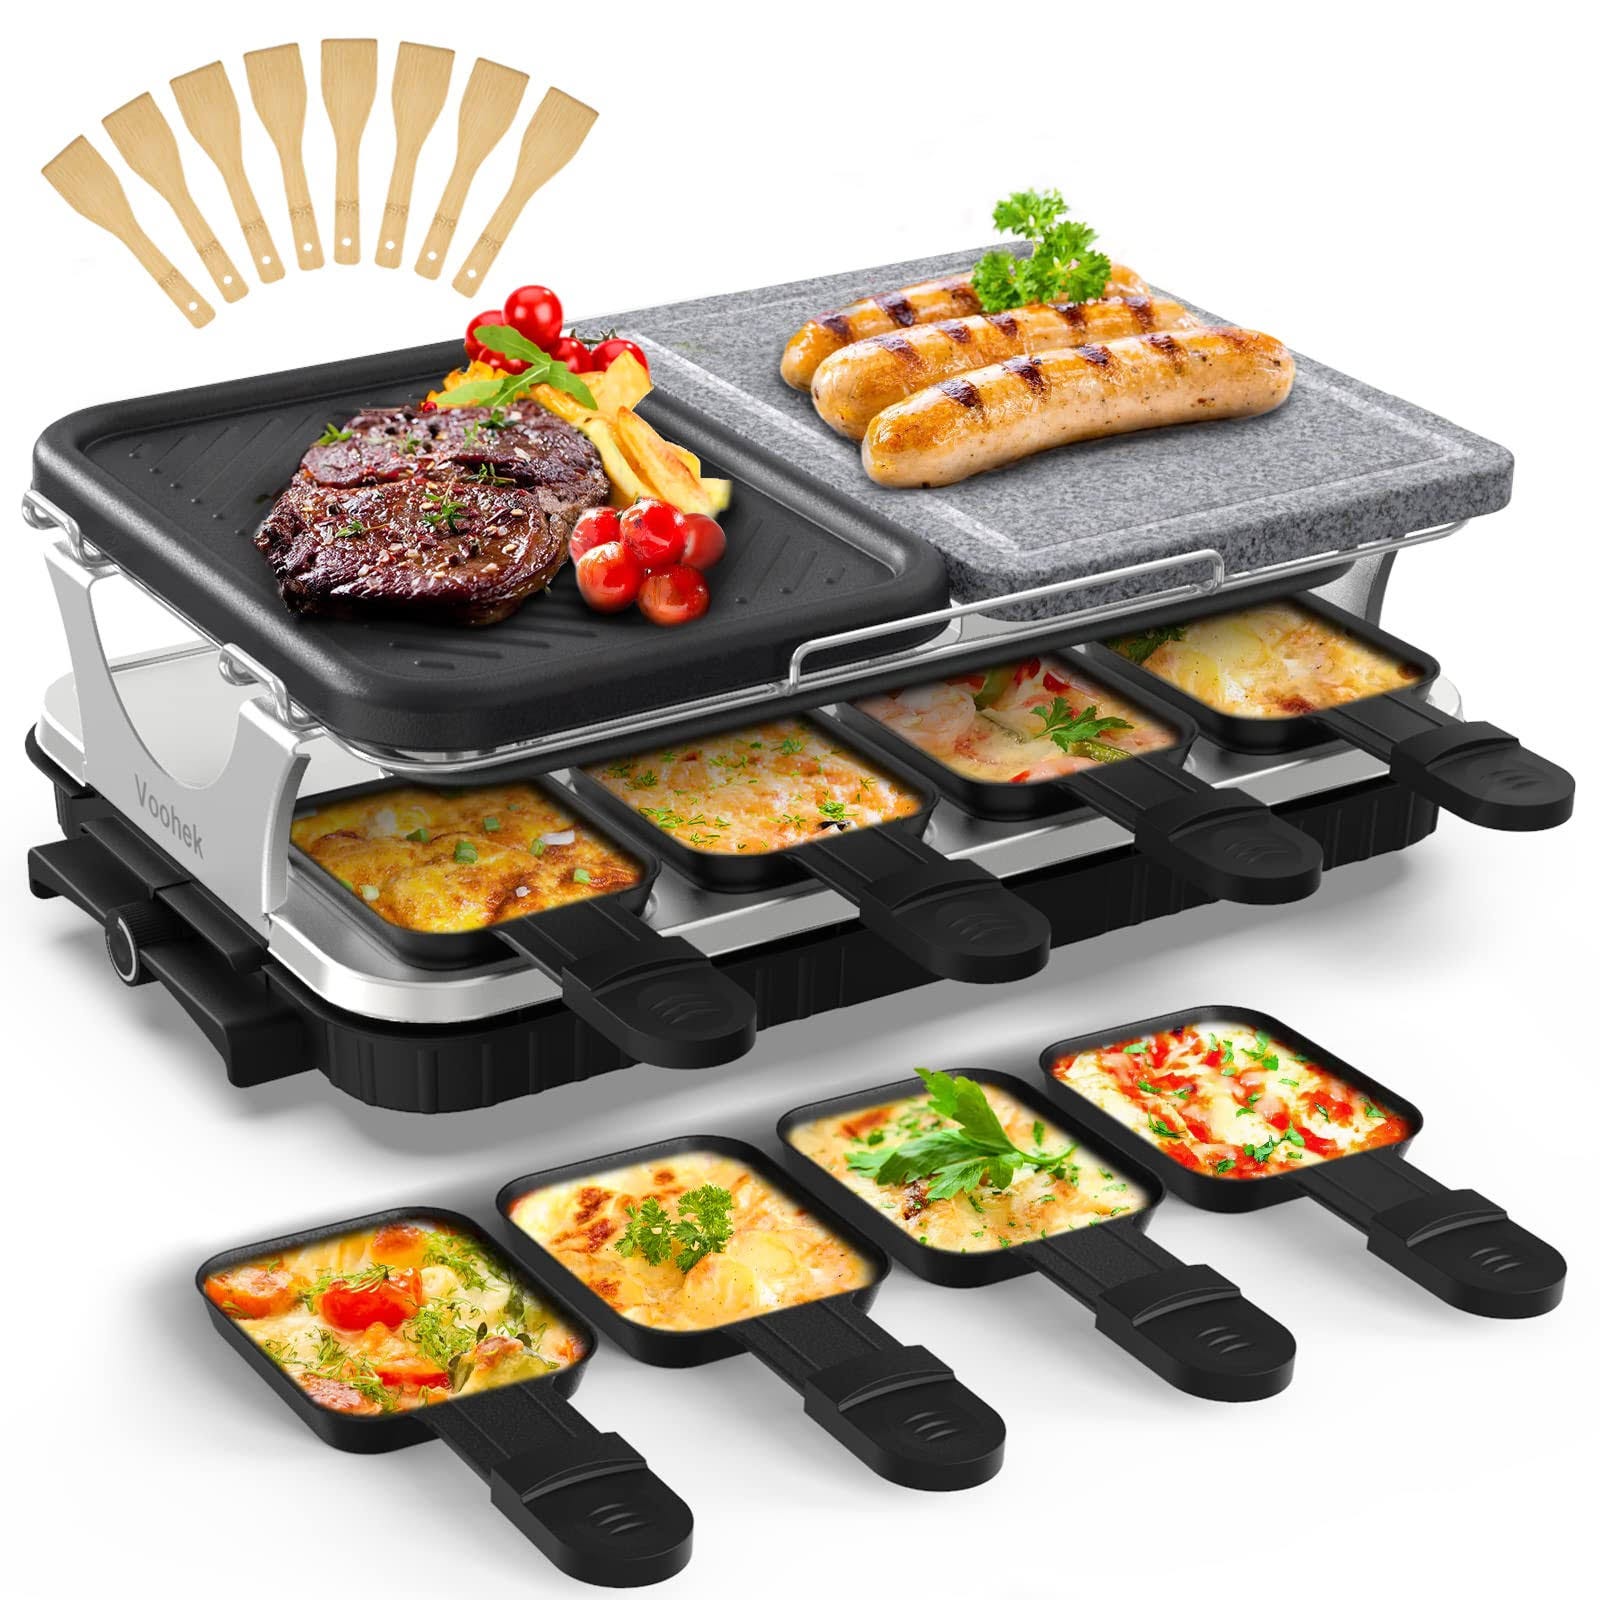 Korean BBQ Grill Raclette with Non-Stick Plate and Stainless Steel Frame | Image